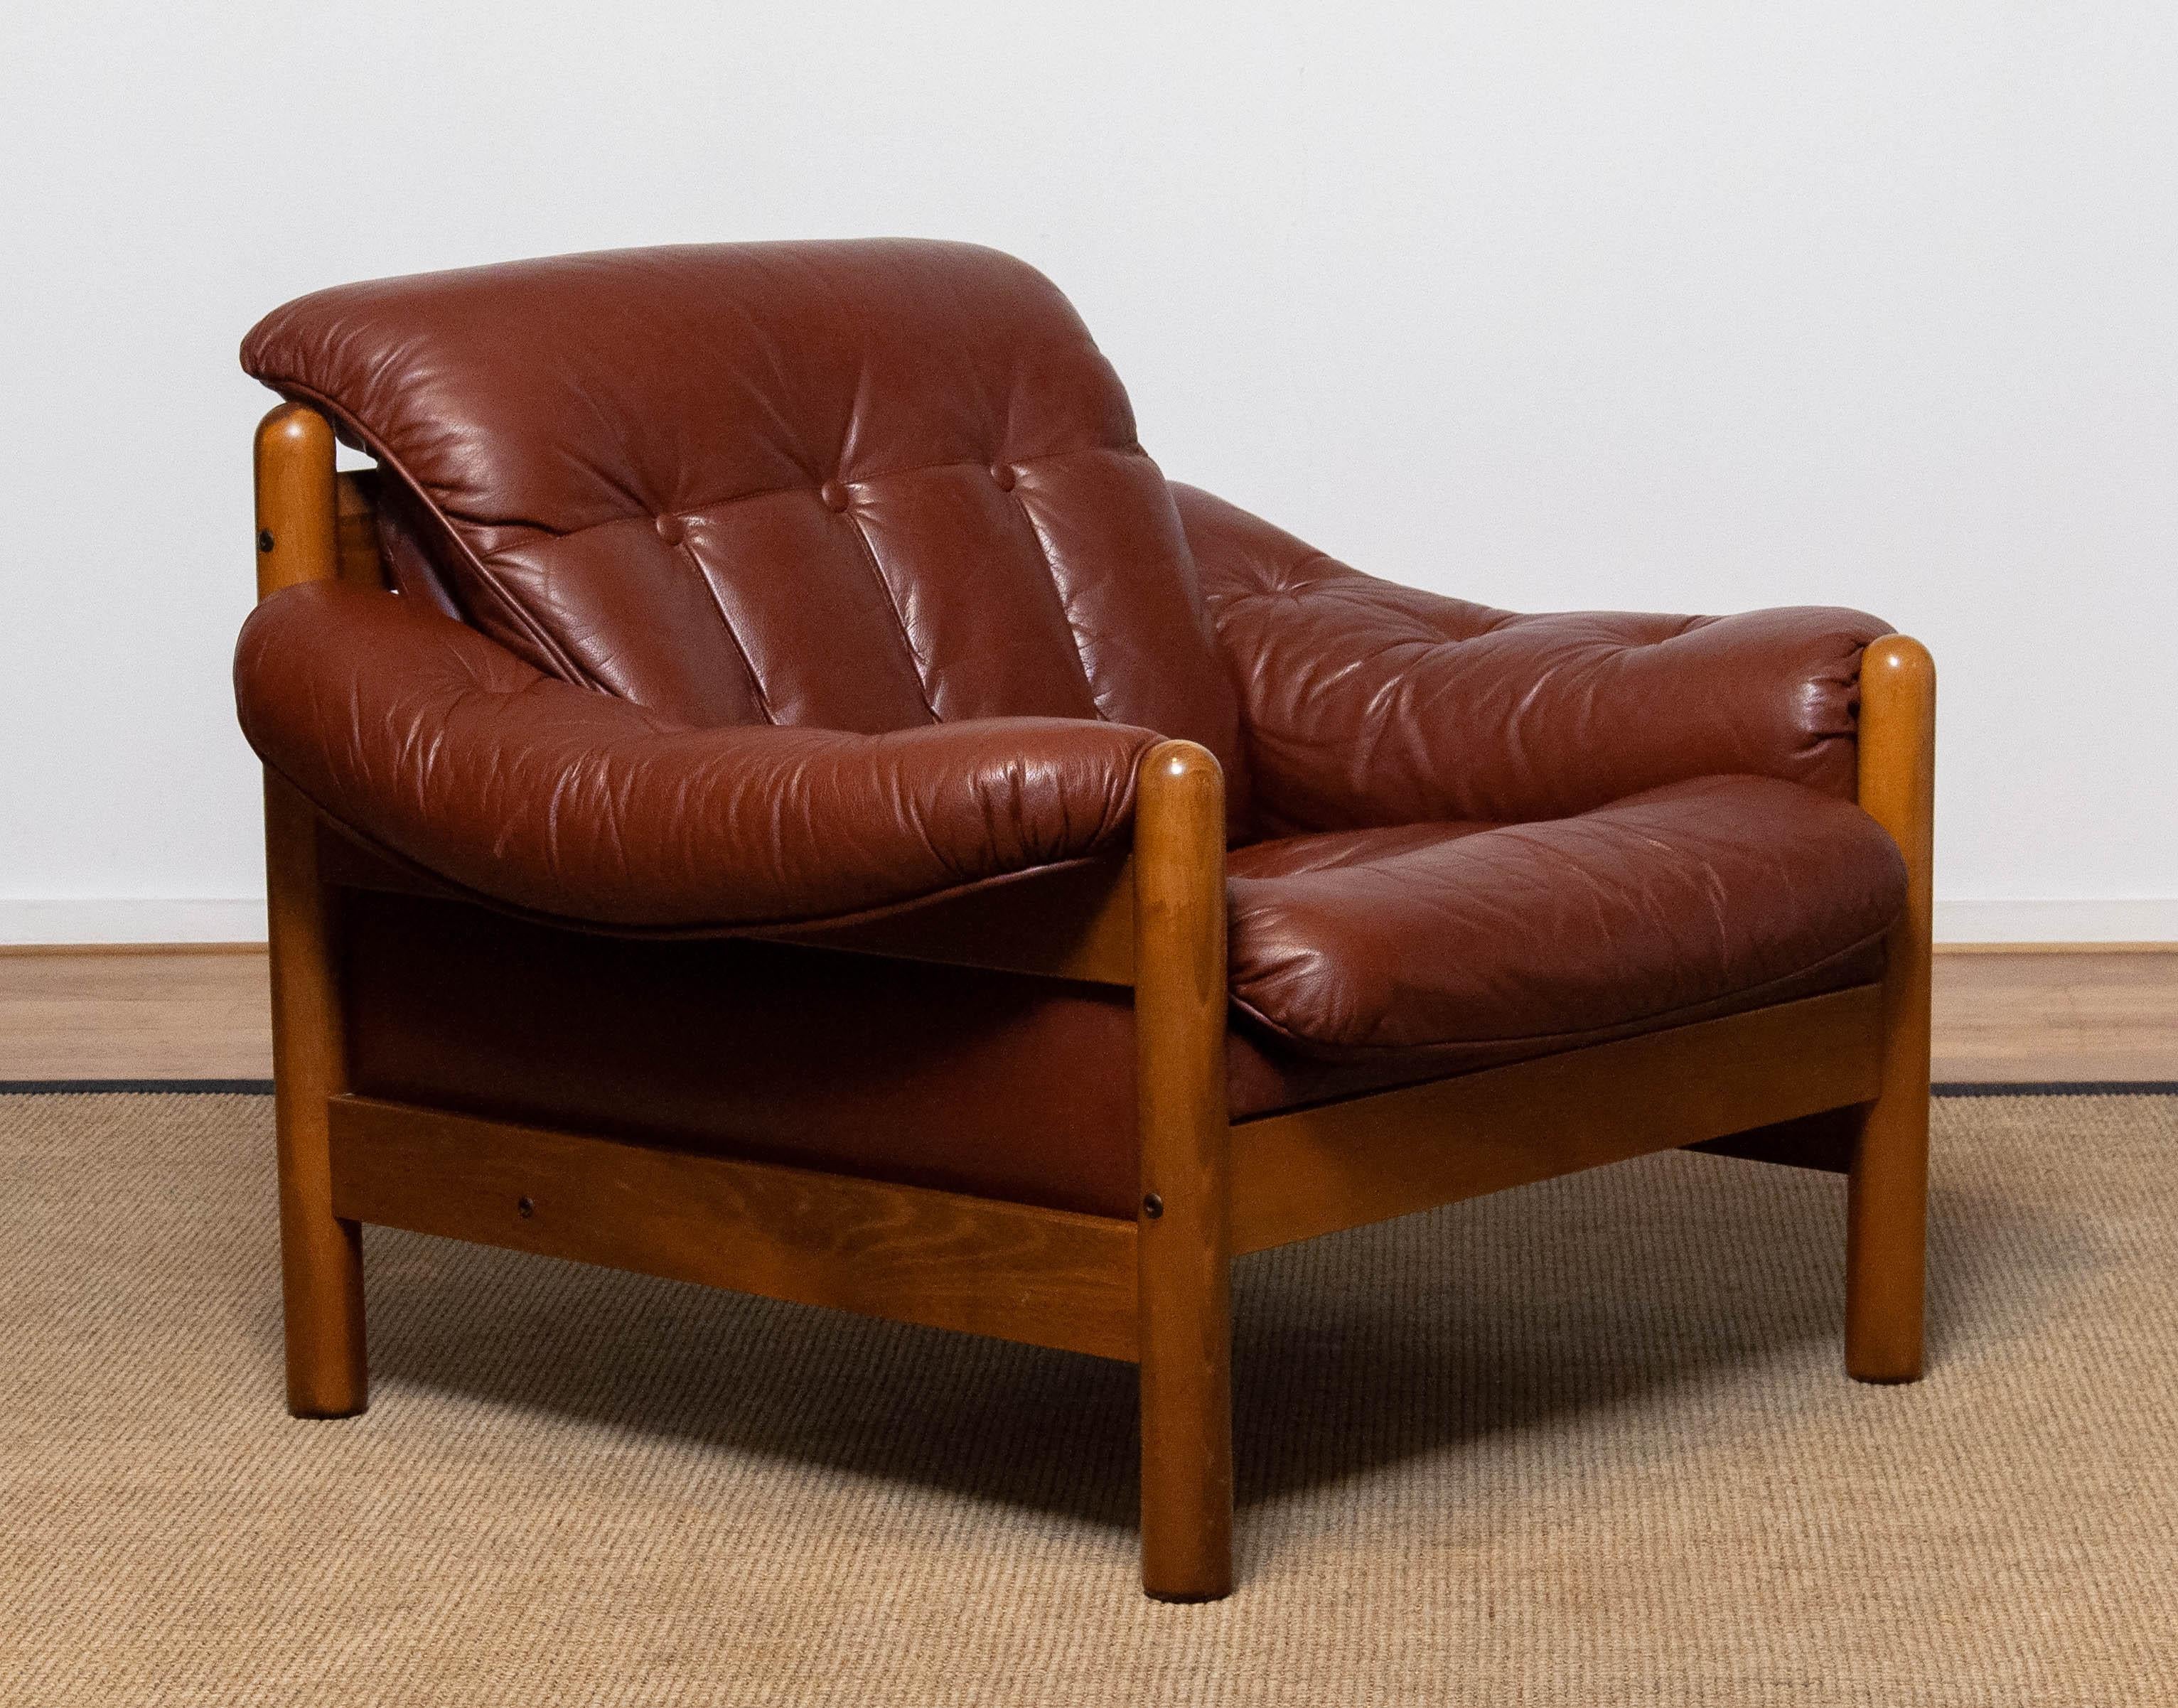 Beautiful Brutalist / Brazilian style lounge chair made by Göte Möbler Nässjö in Sweden in brown leather. The wooden construction is made of beech. Sits absolutely very comfortable even for a longer period. Allover in very good condition.
Please